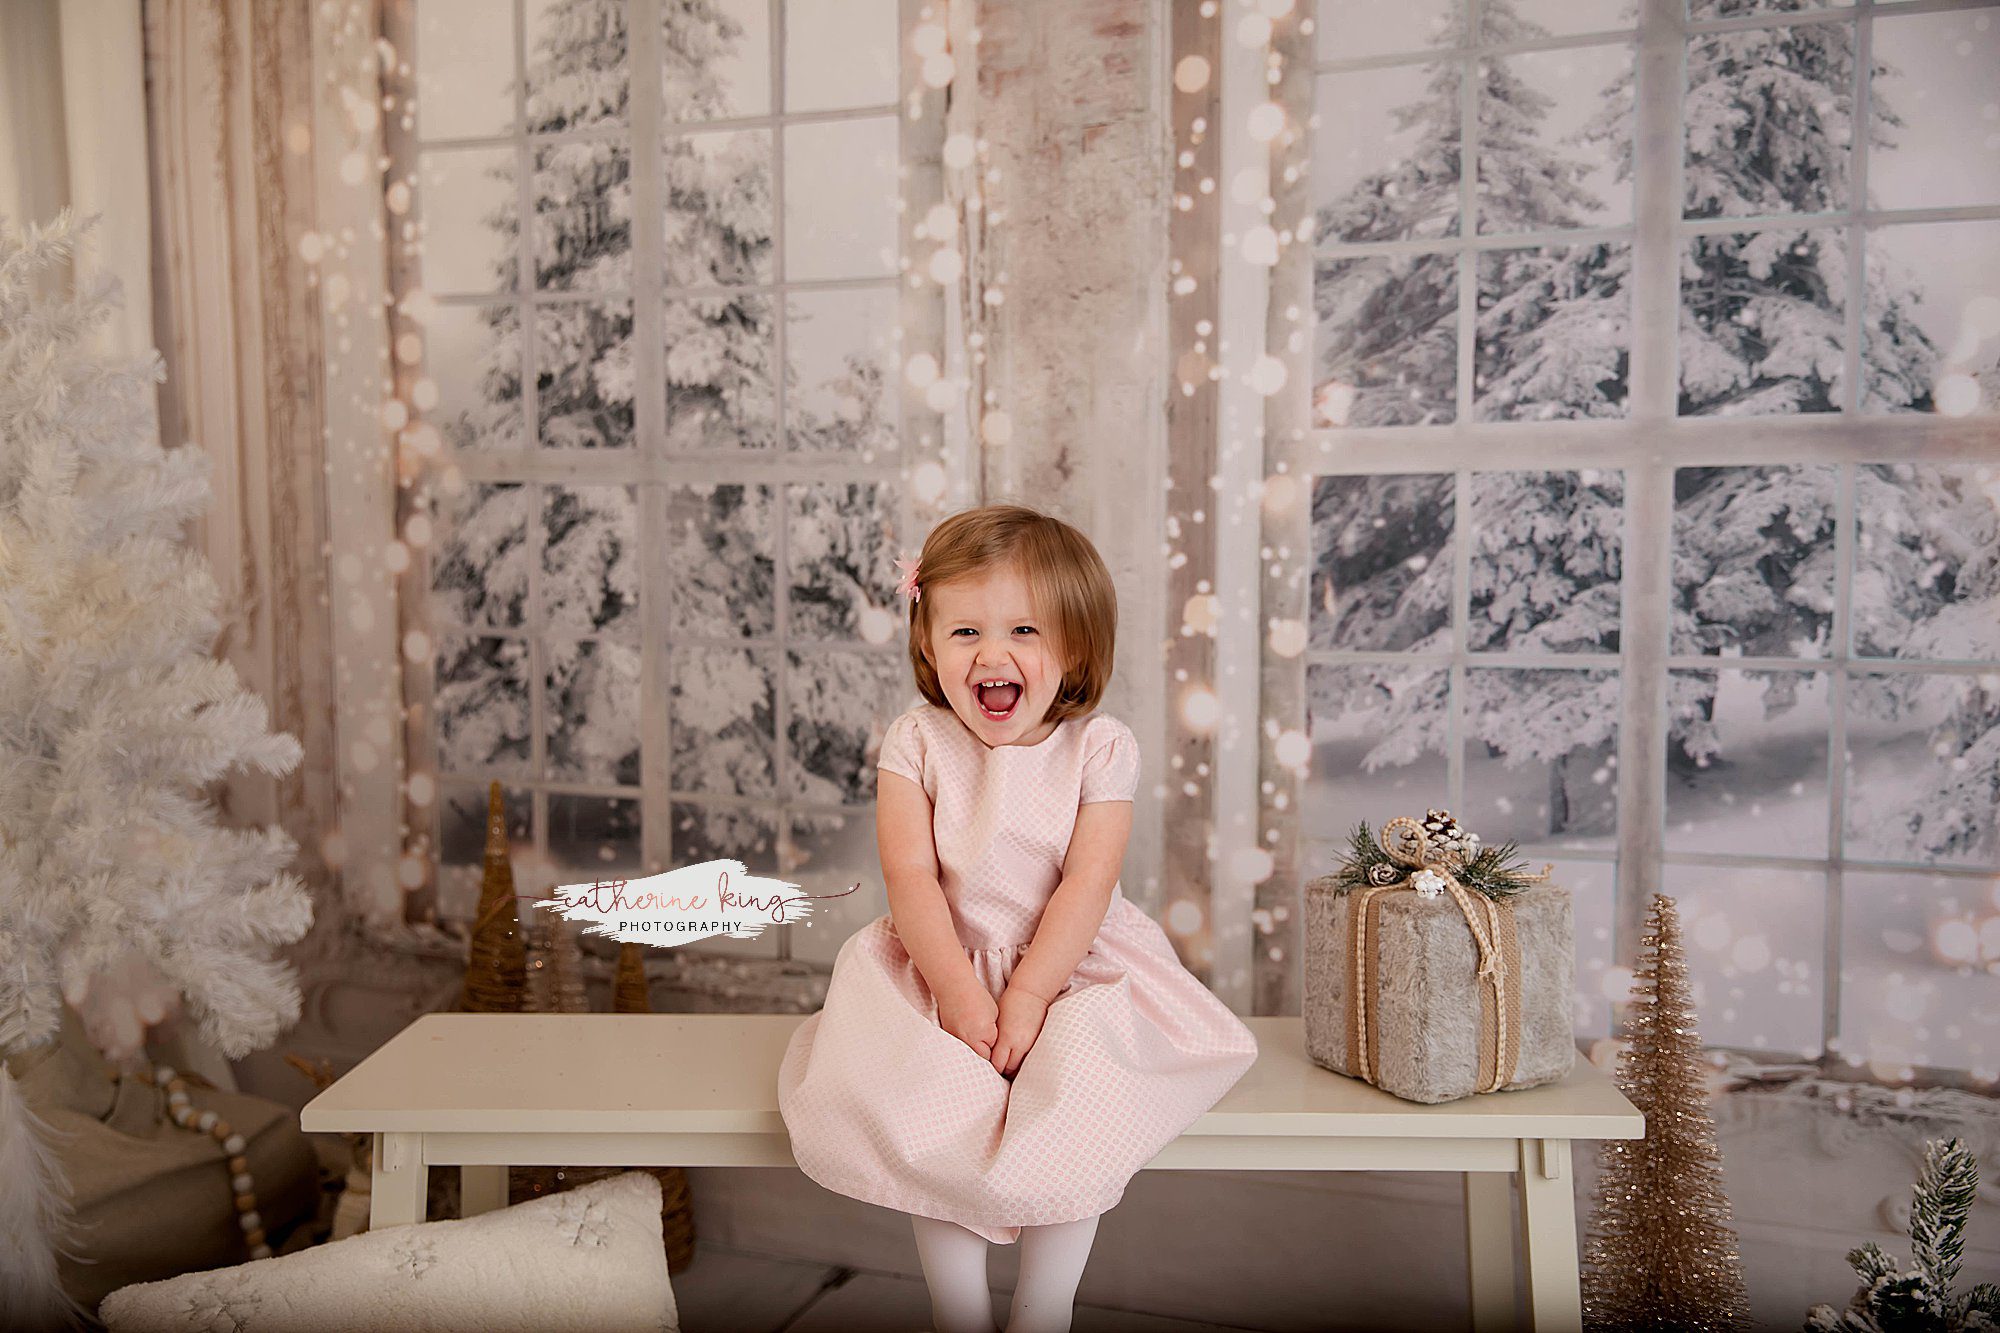 I am thrilled to announce our exclusive Holiday and Christmas Mini Photography Sessions in Madison, CT